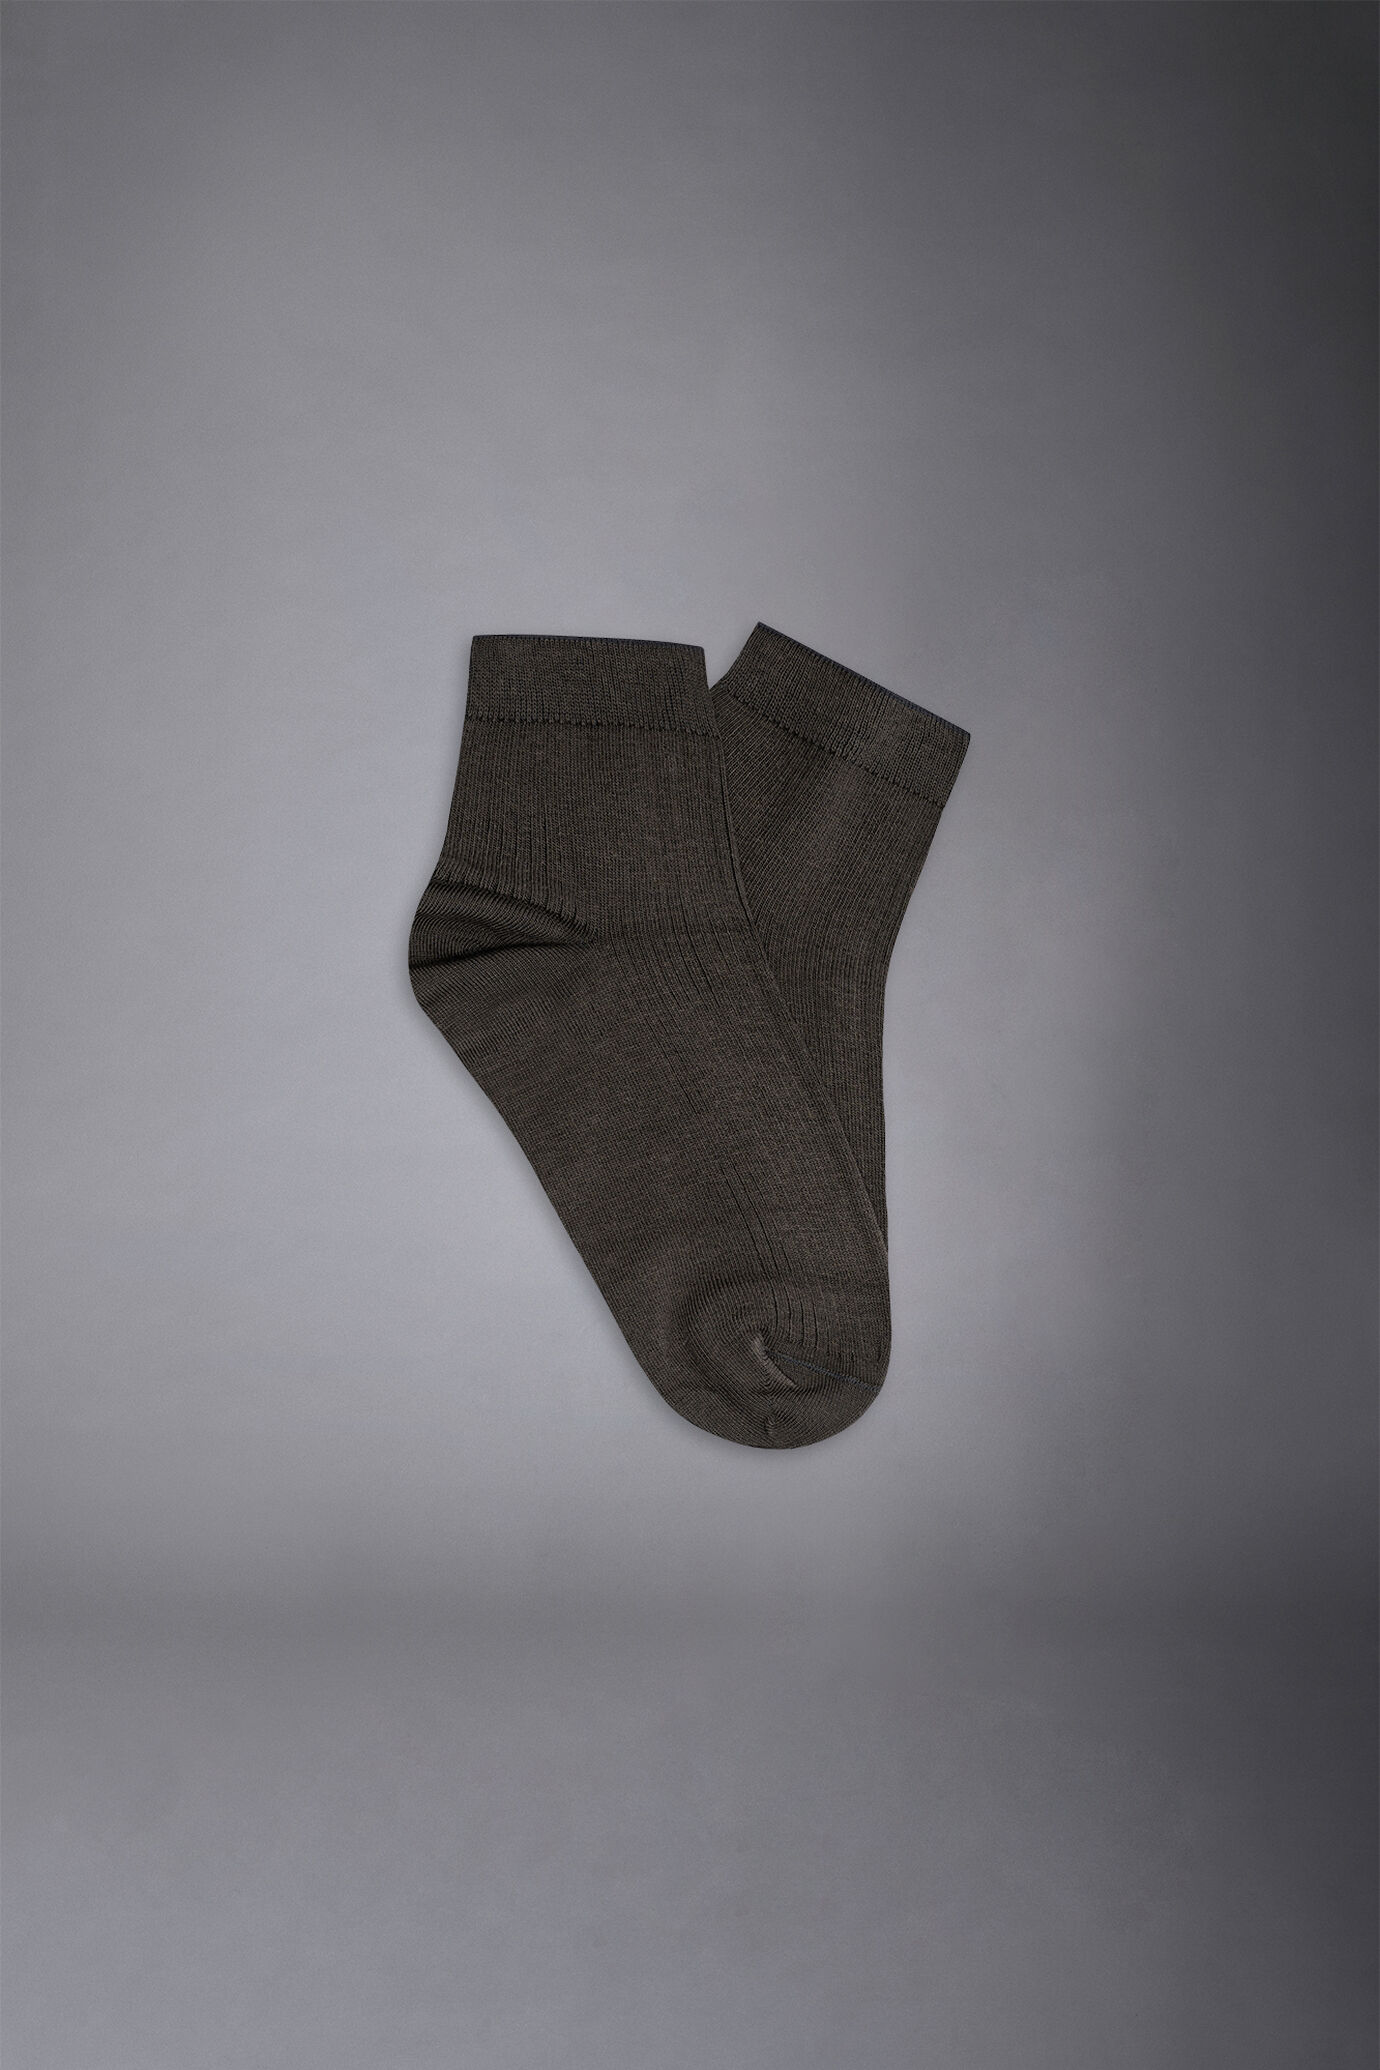 Cotton blended low cut socks solit colour rib knit made in italy